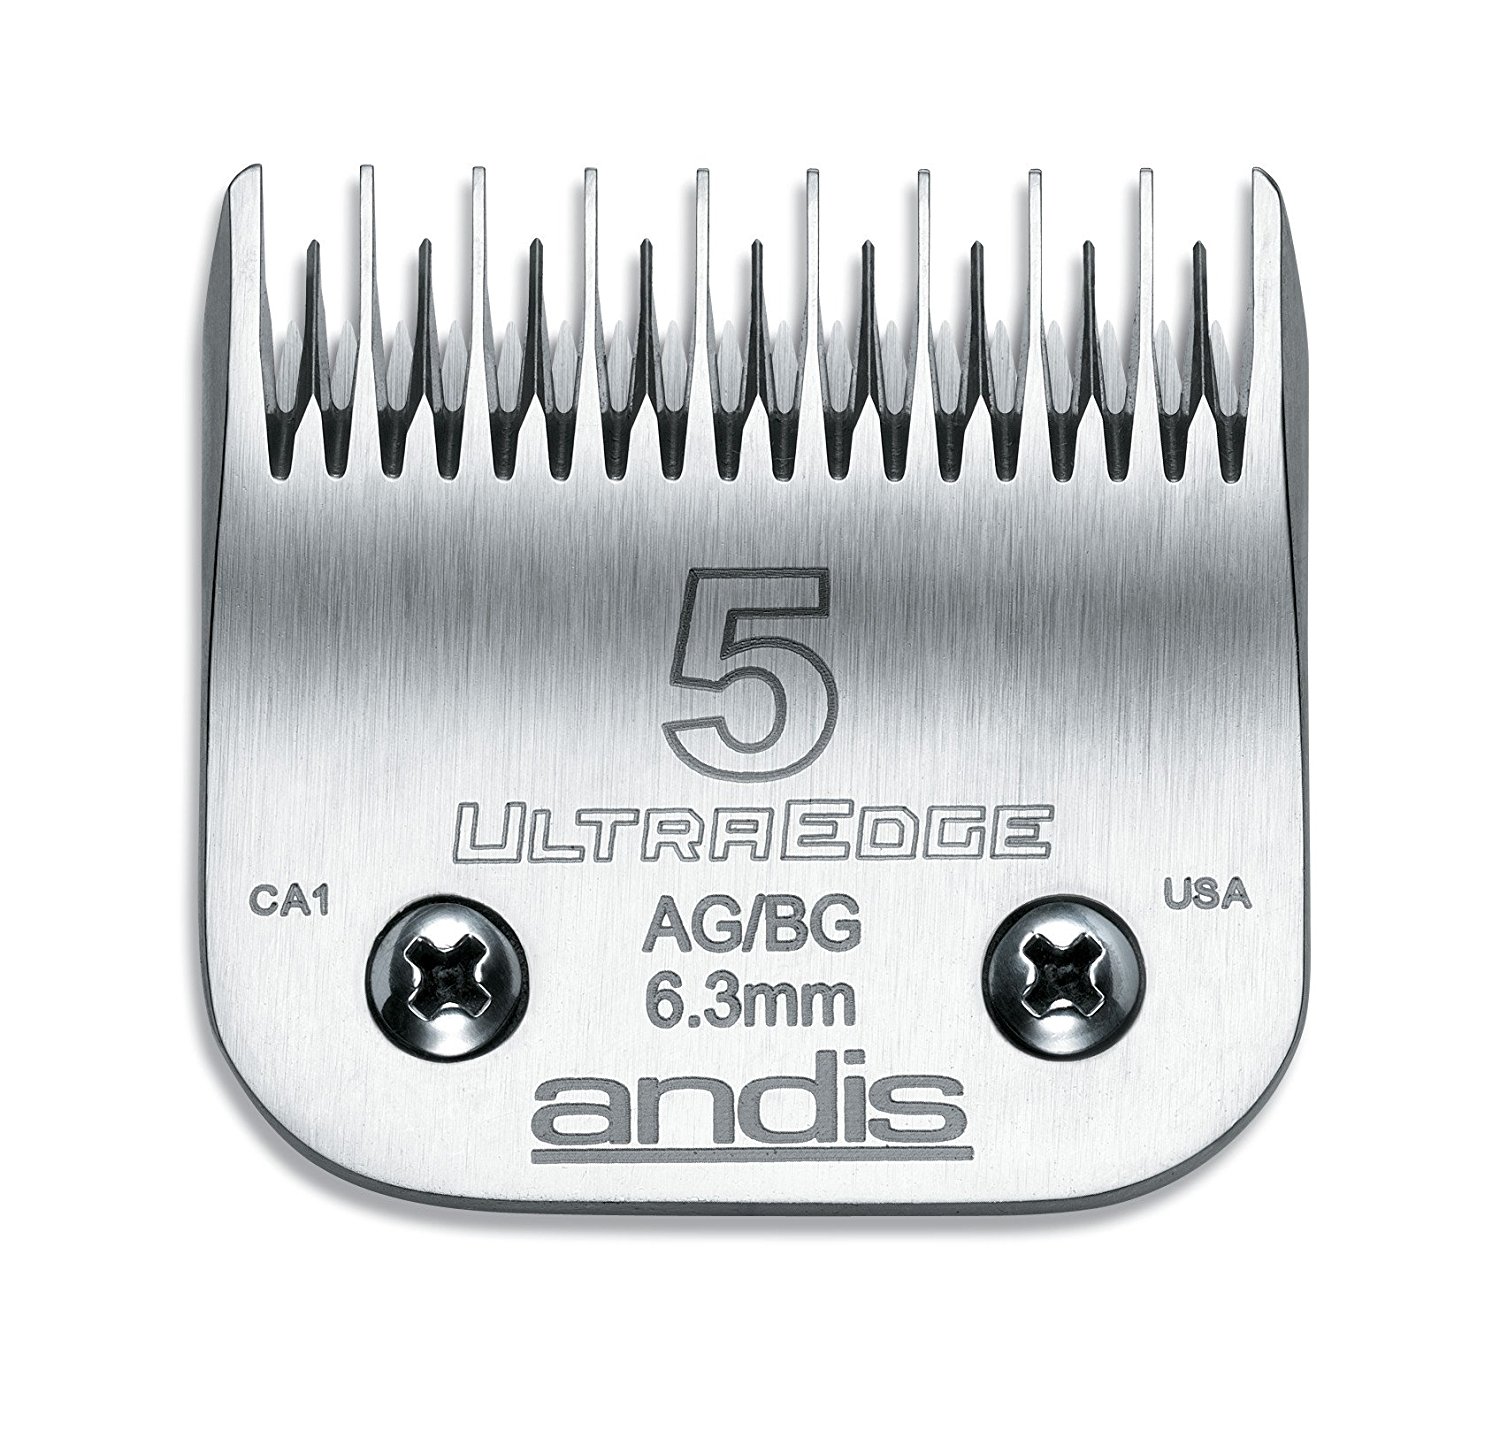 andis dog clipper blades chart